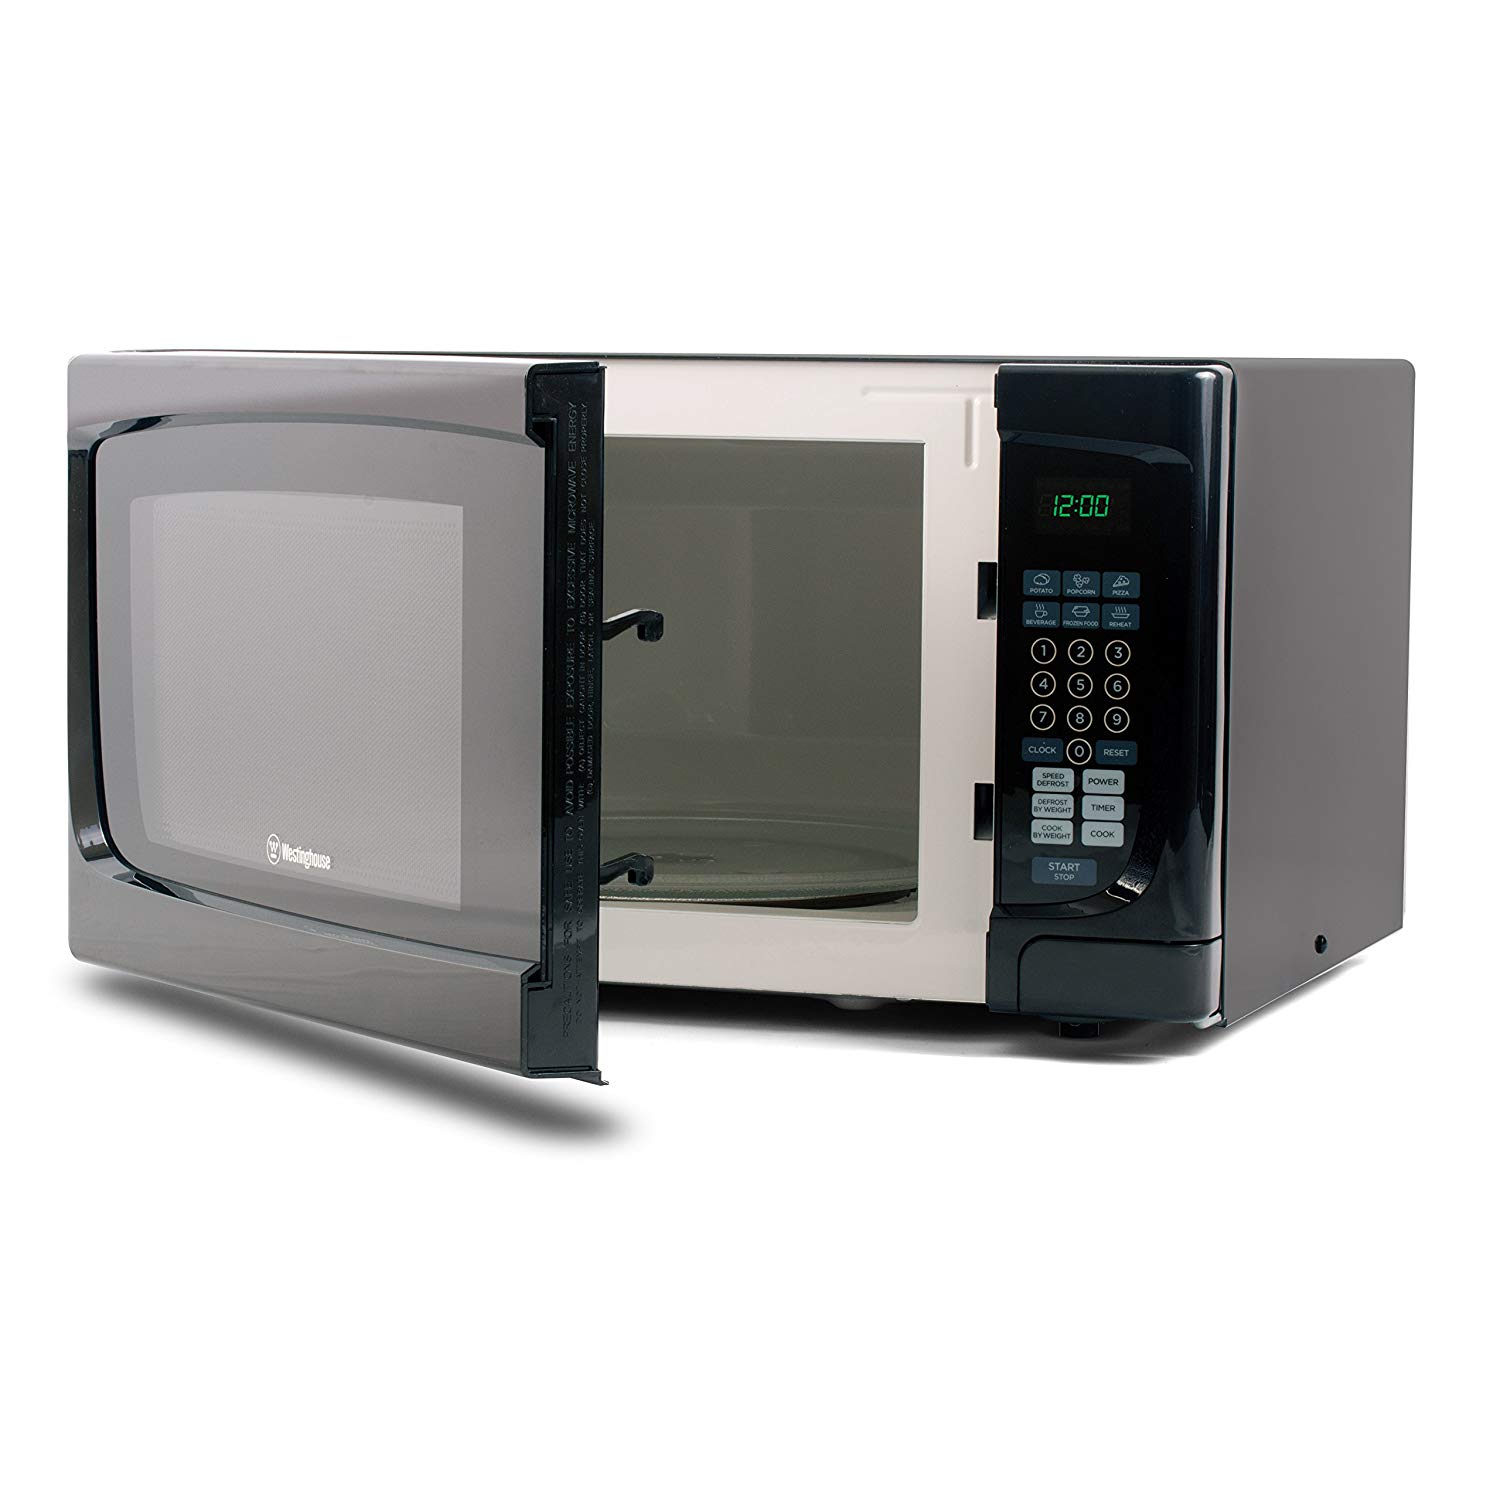 Westinghouse WCM16100B 1000 Watt Counter Top Microwave Oven, 1.6 Cubic Feet, Black Cabinet